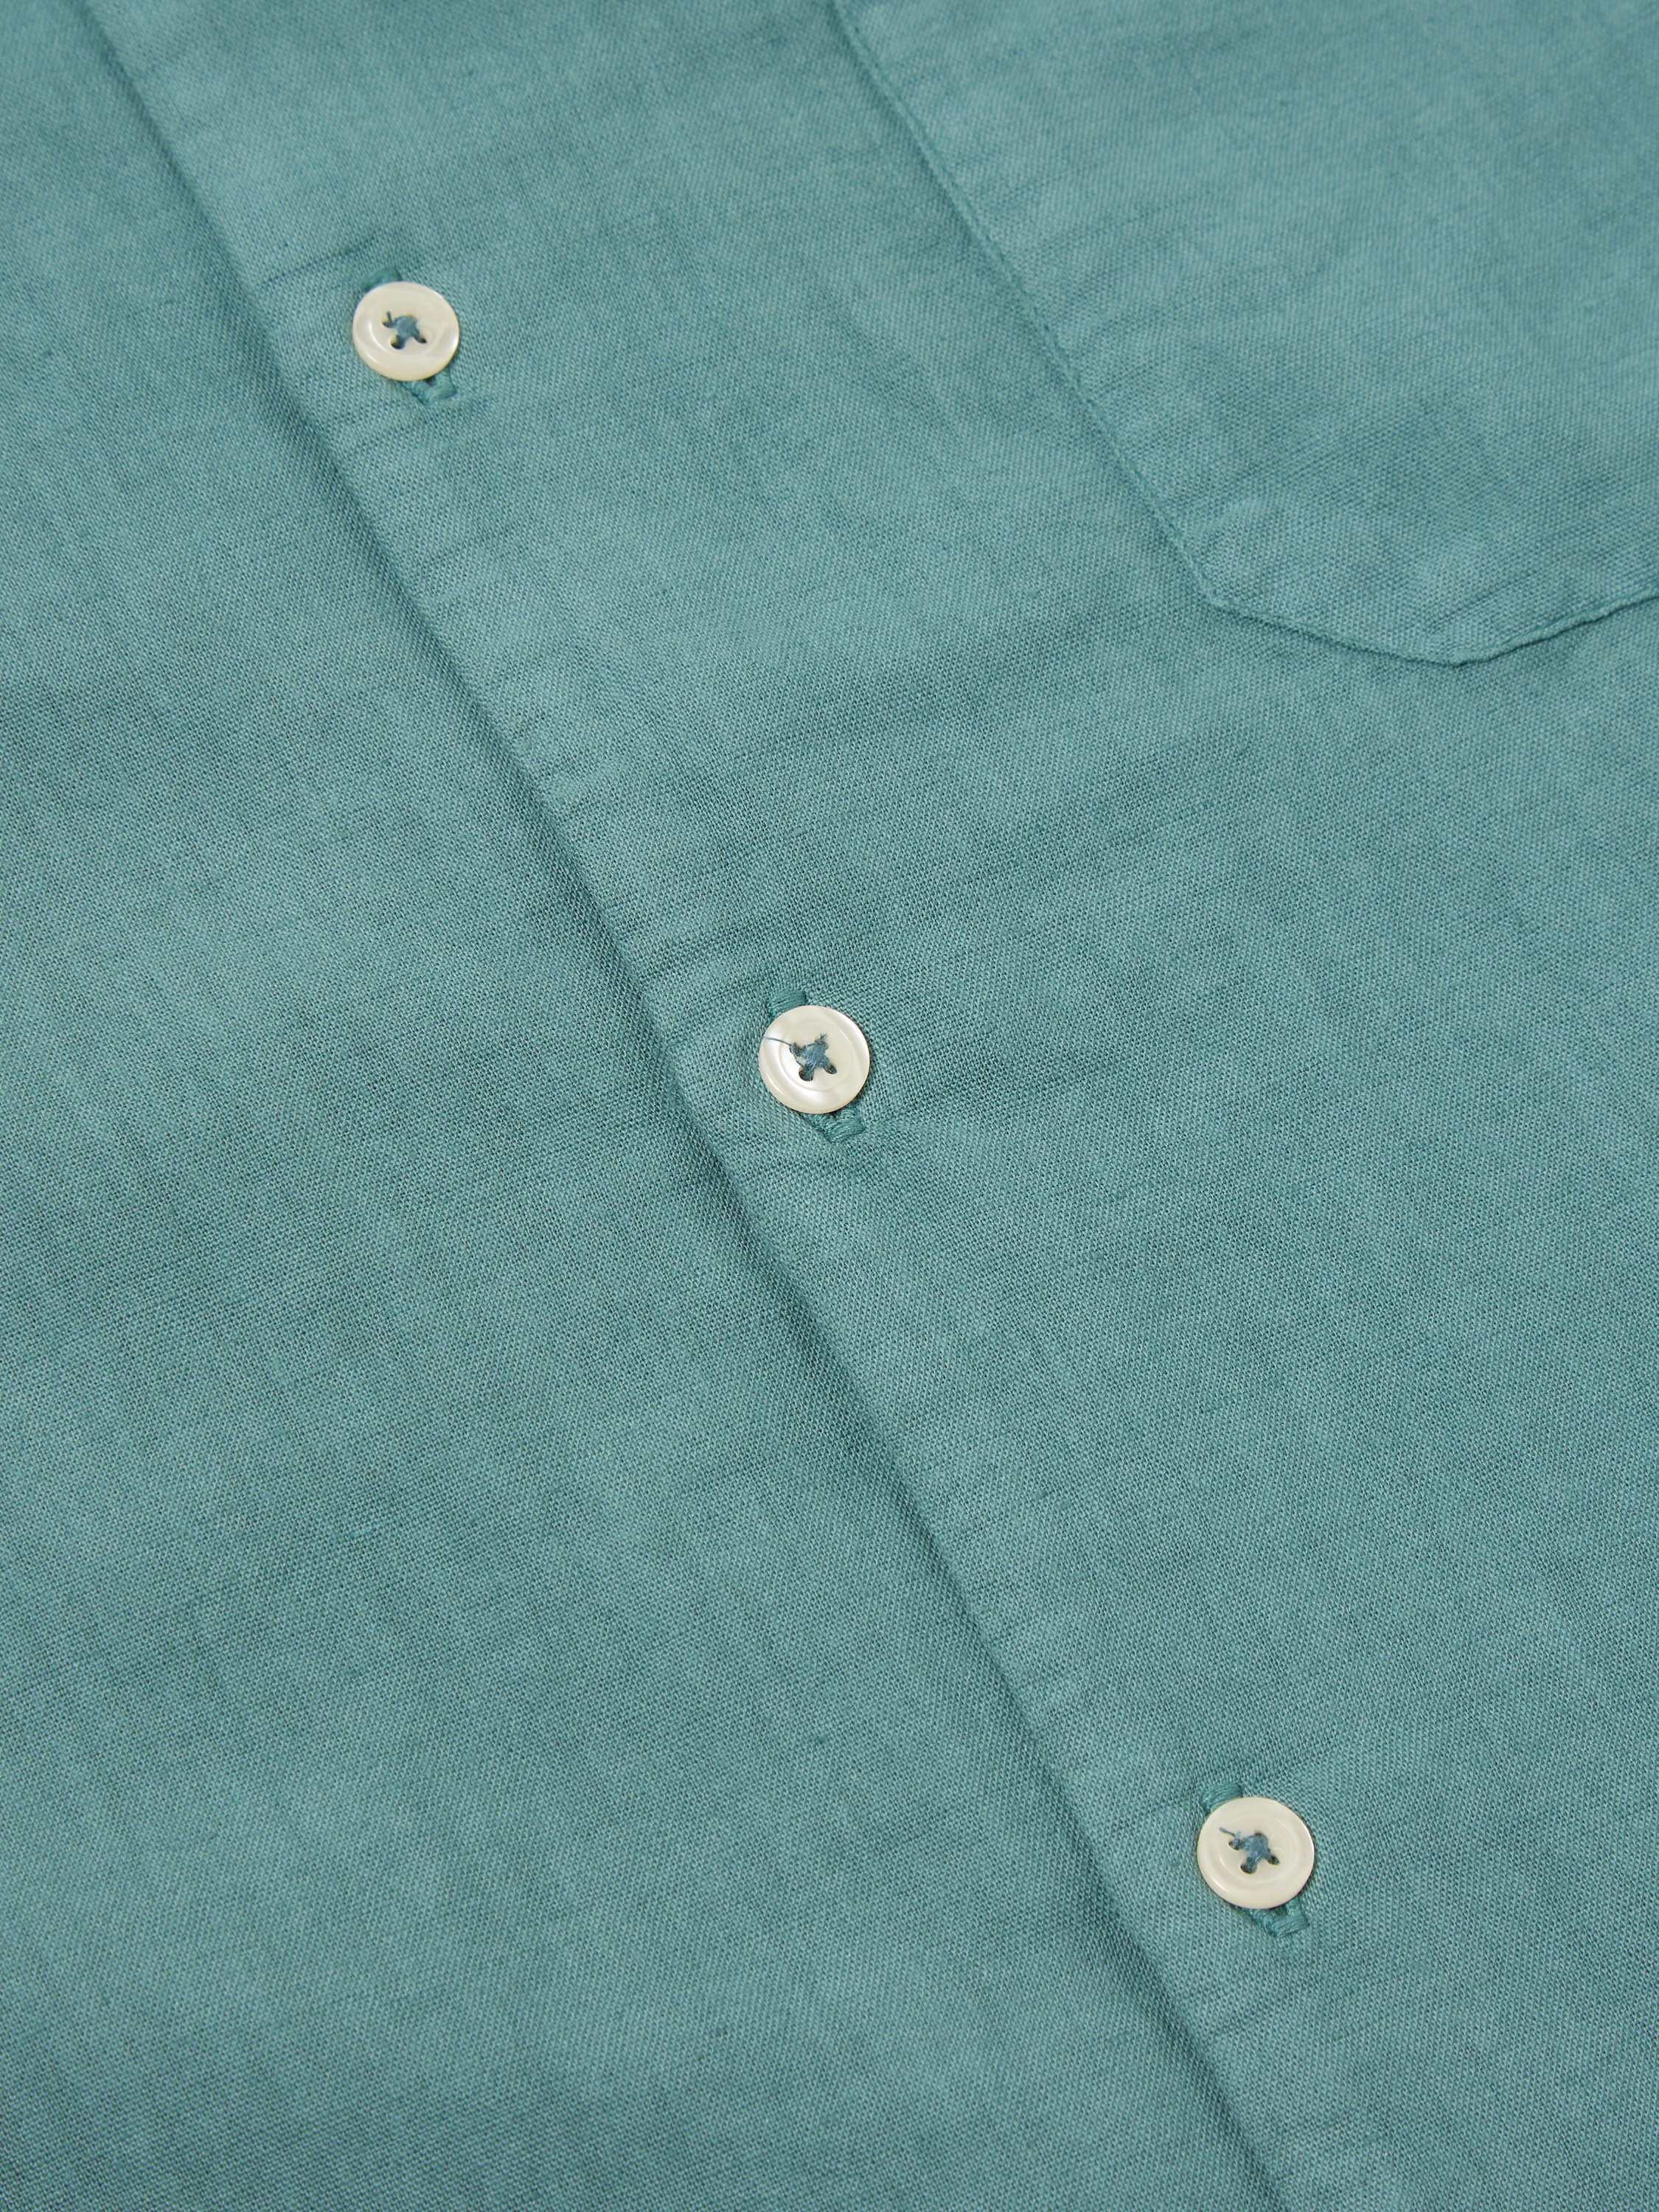 Universal Works Road Shirt in Sea Blue Linen Cotton Shirting